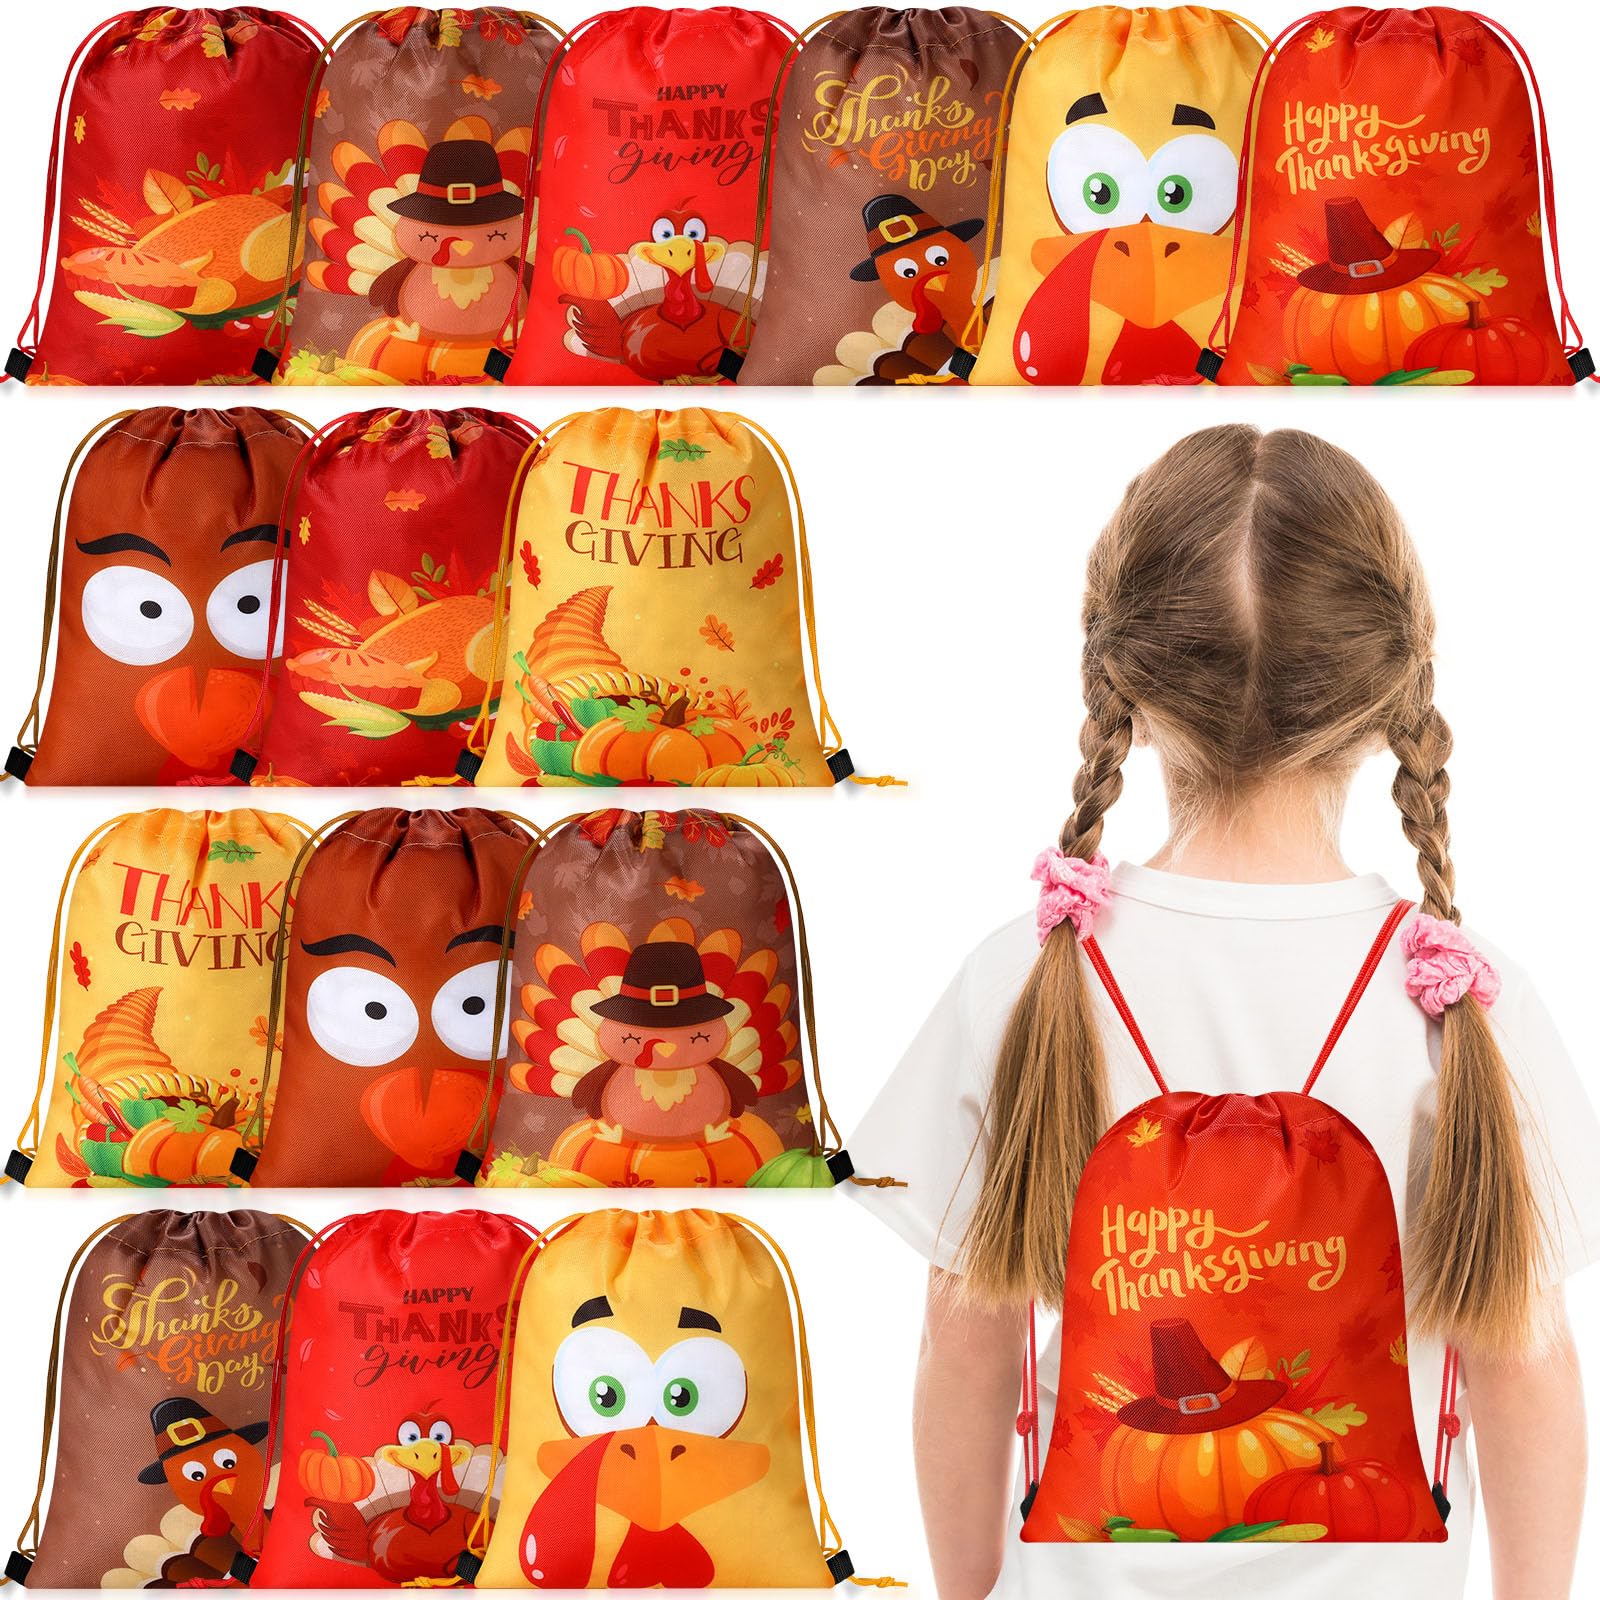 Paterr 16 Pcs Fall Favor Bags Bulk Thanksgiving Drawstring Bags Maple Leaf Carnival Candy Bags Pumpkin Gift Bags Autumn Goodie Treat Bags for Classroom Harvest Fall Birthday Party Decor,10 x 12 Inch